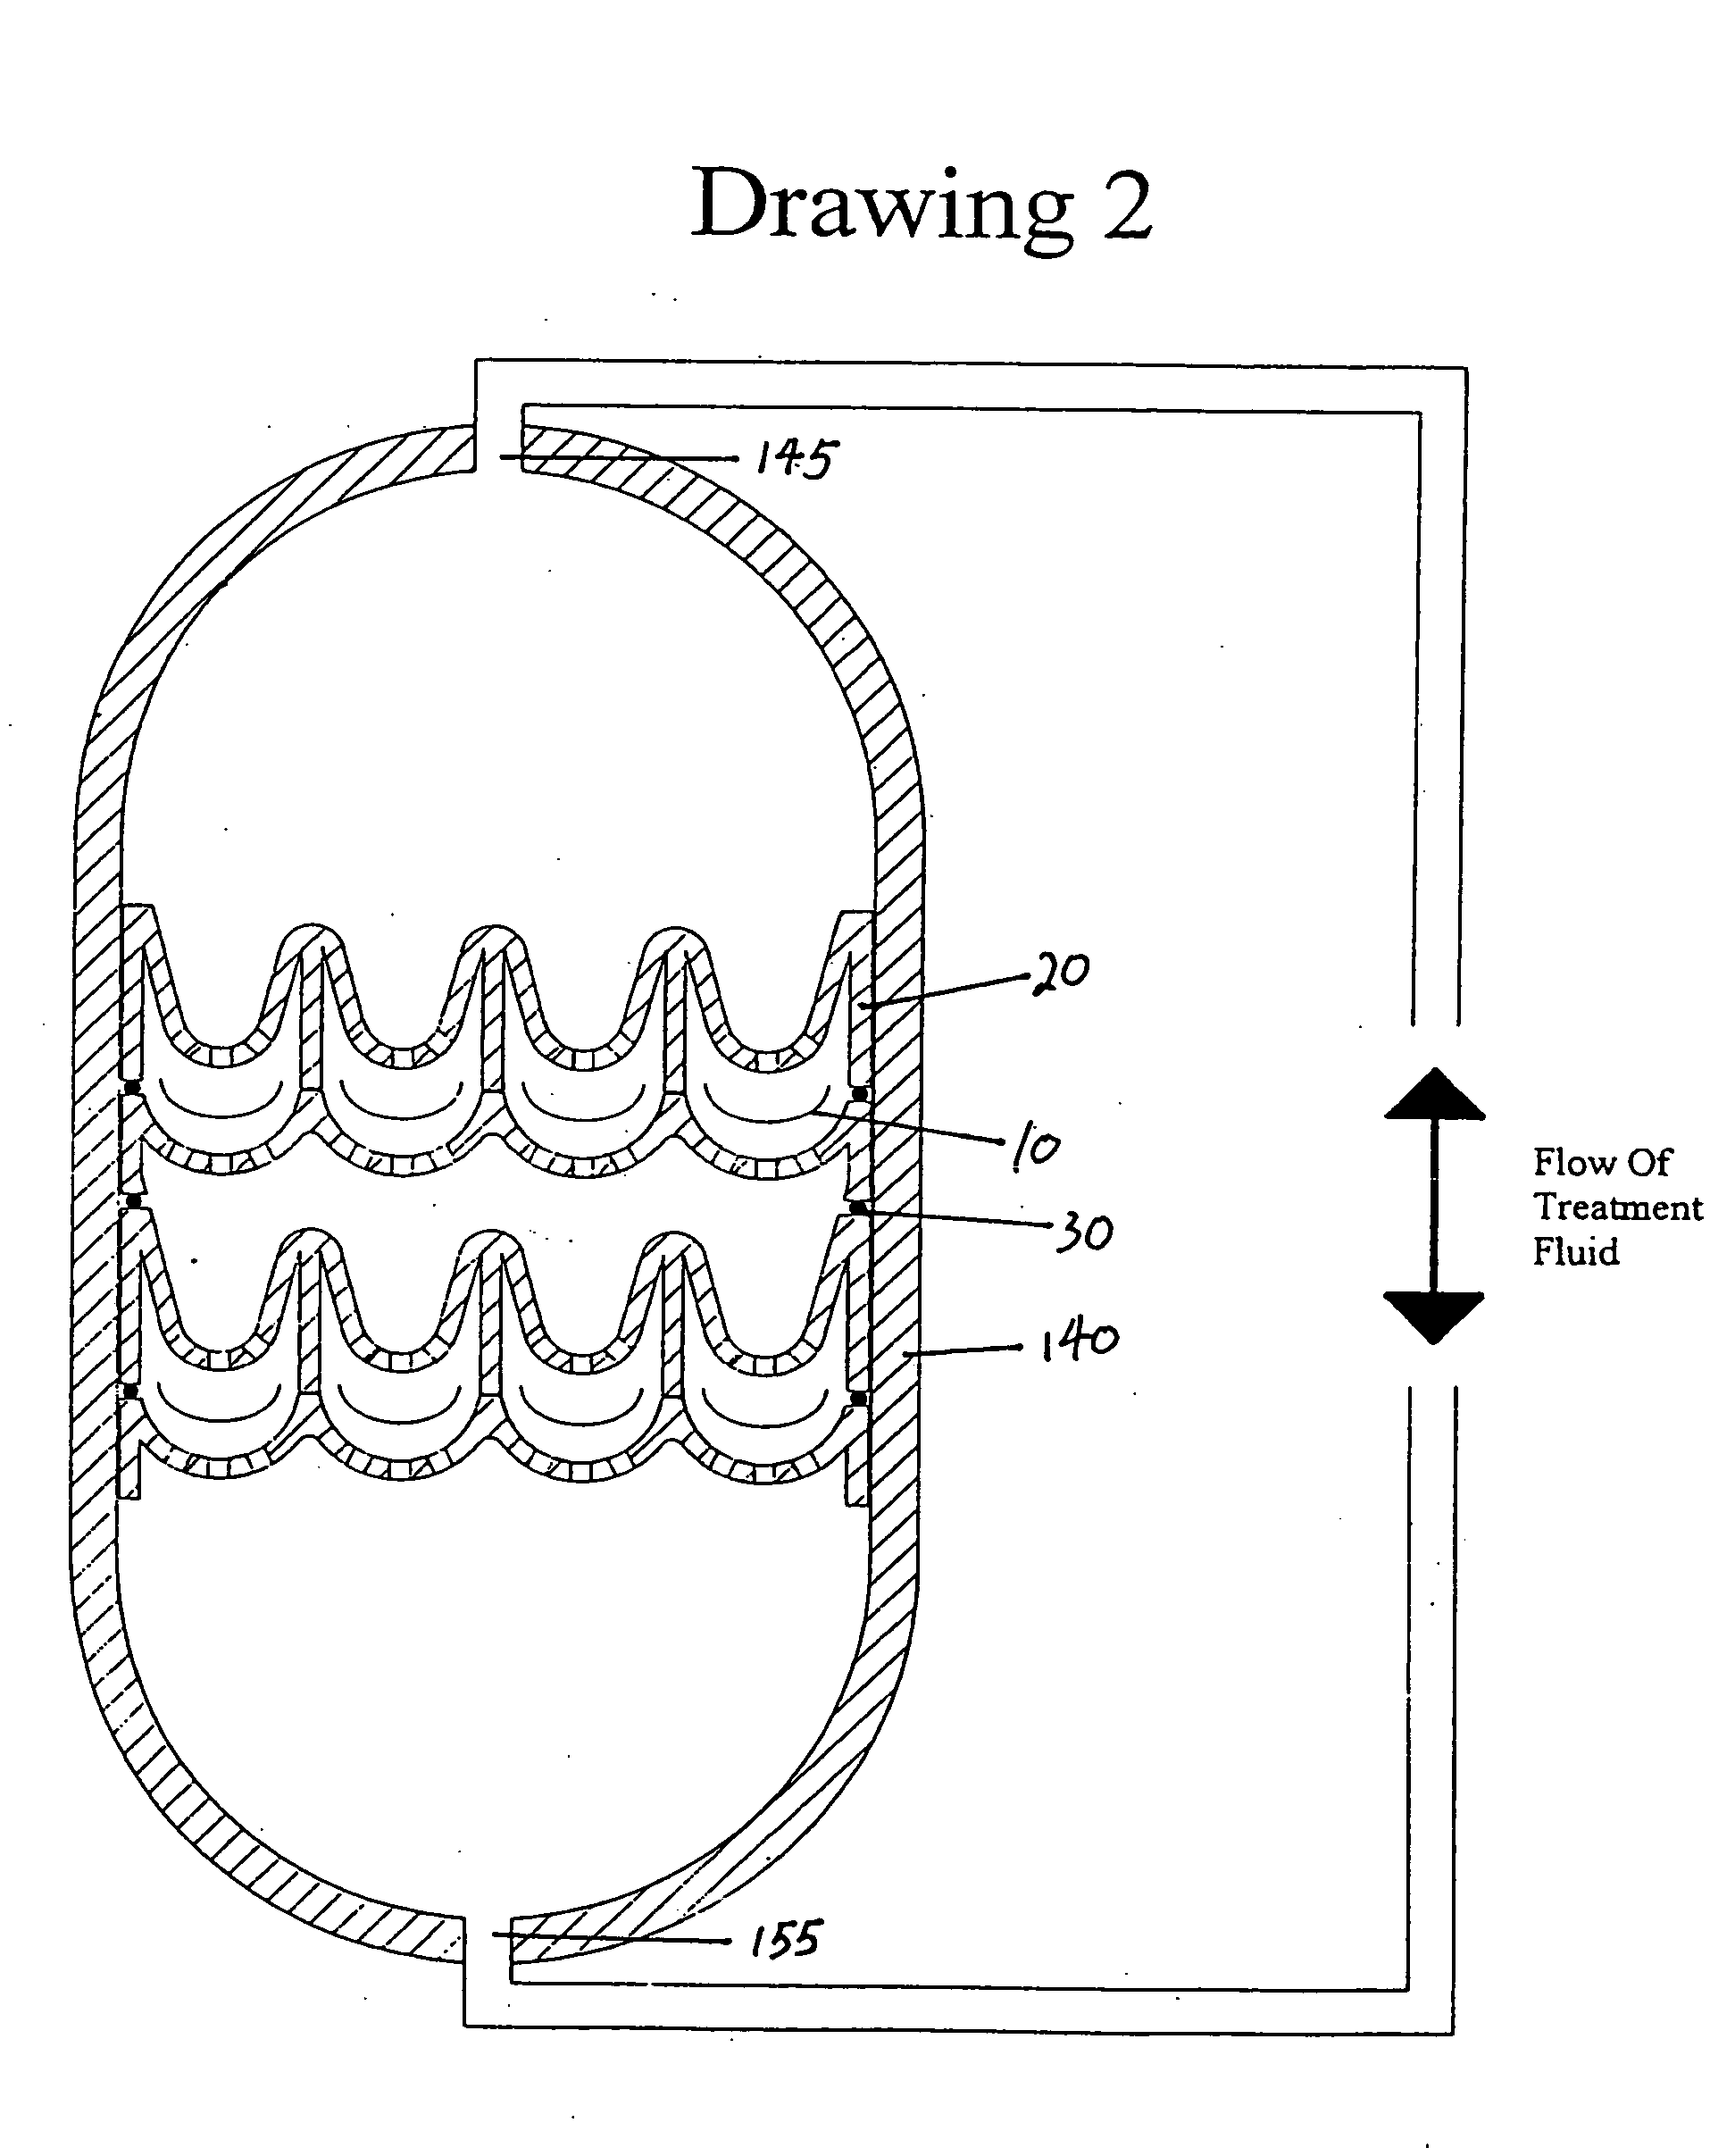 System and method for treating articles with fluids